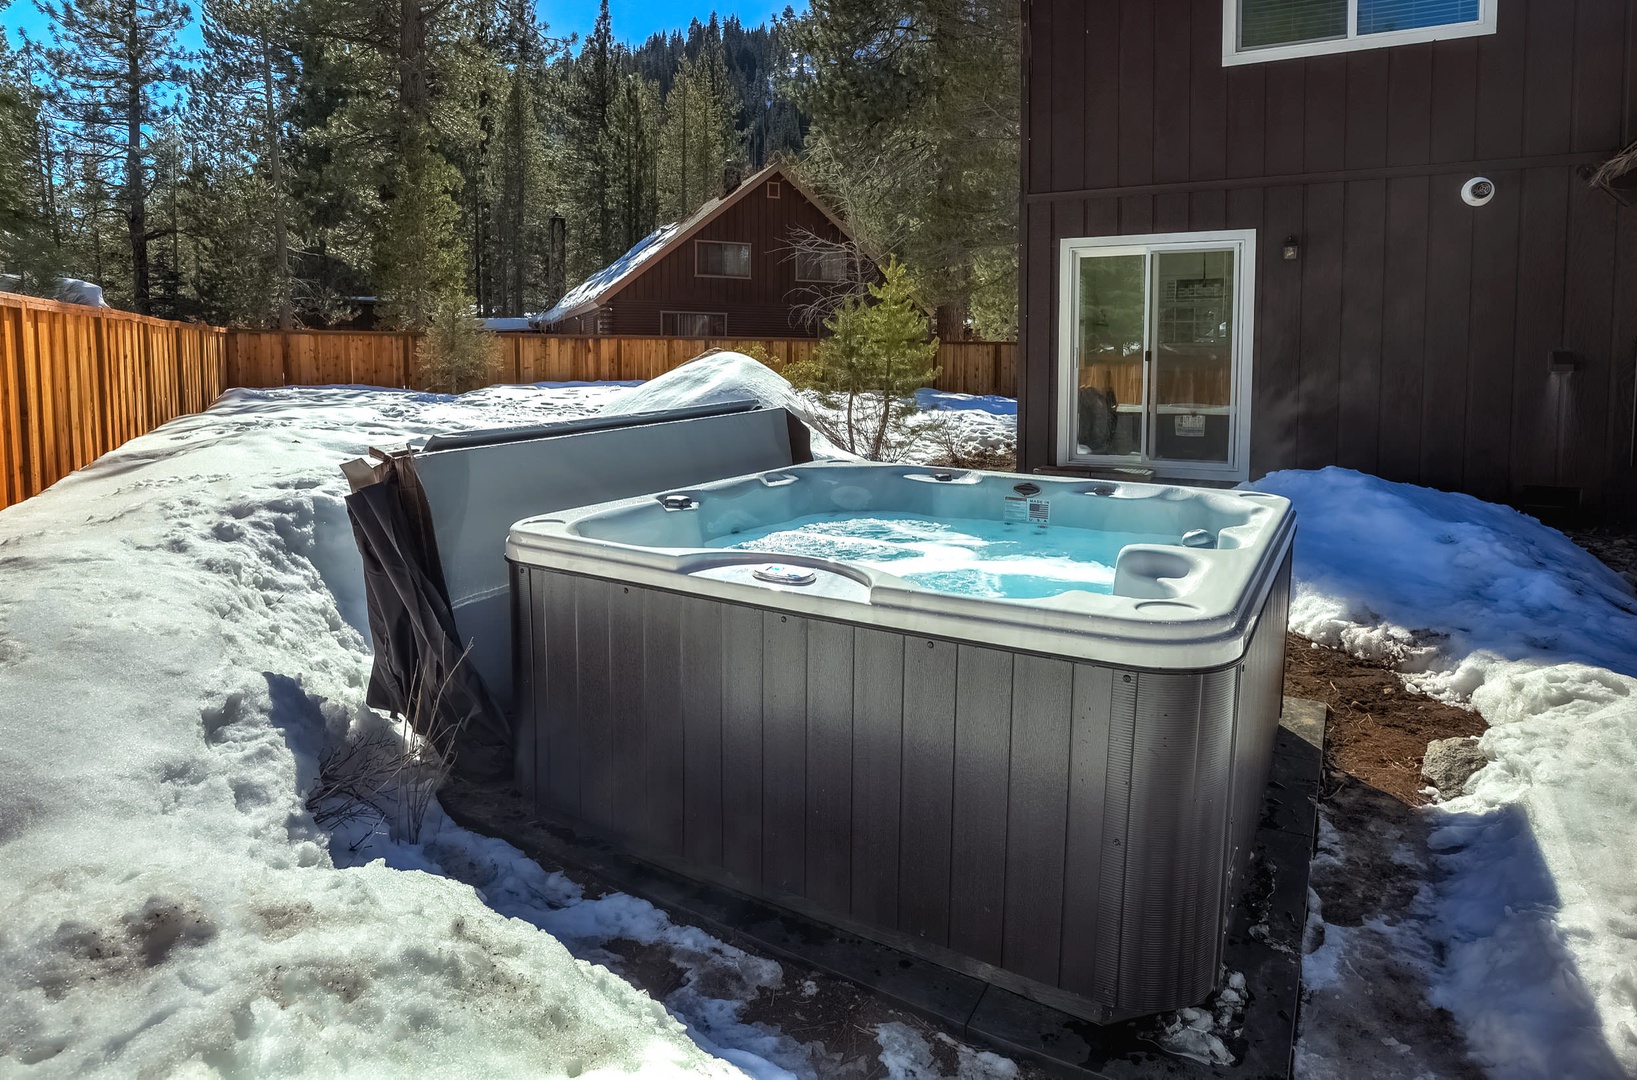 Private outdoor hot tub in backyard